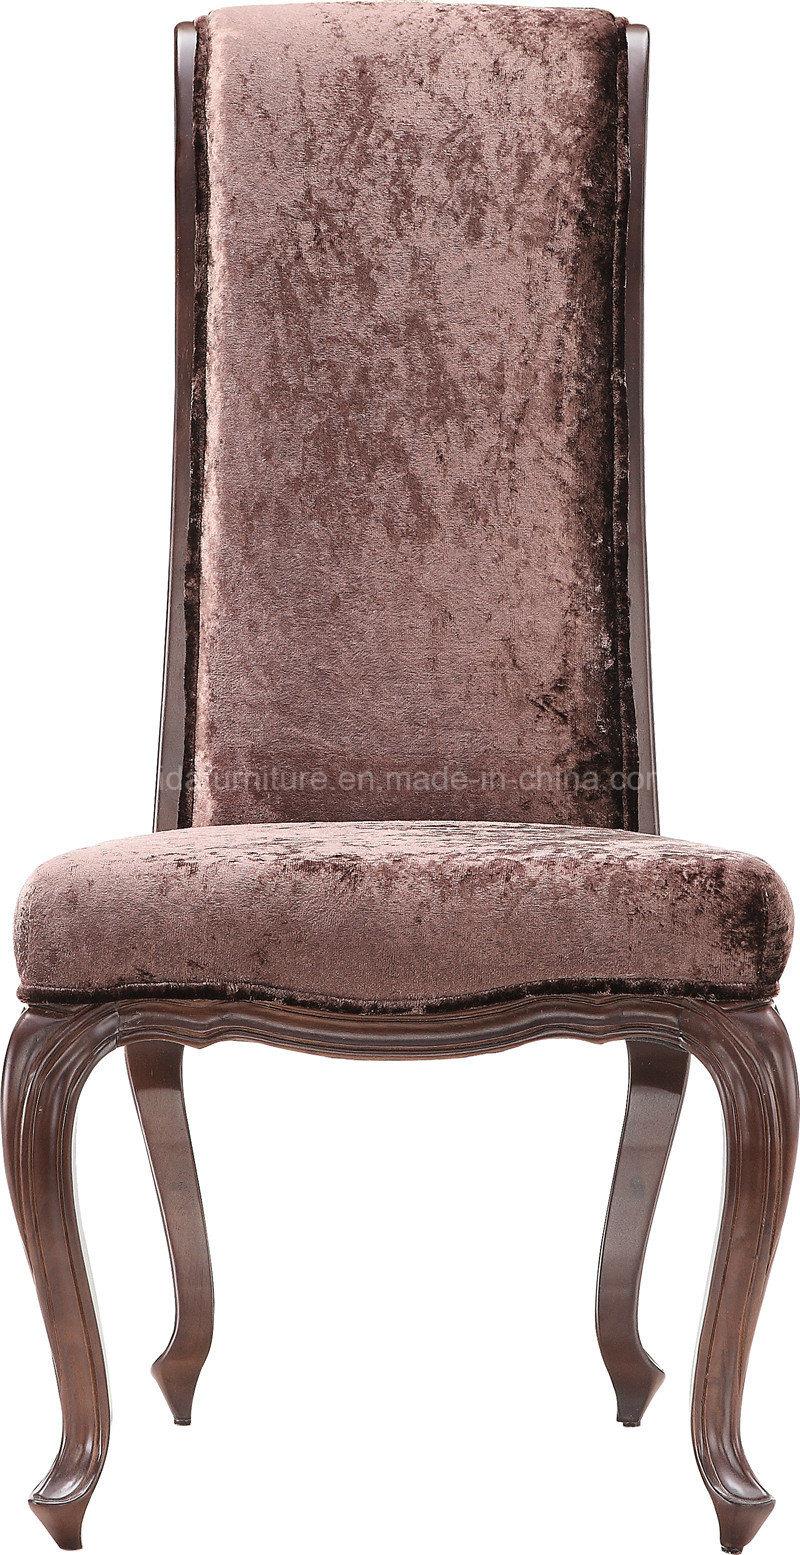 Contemporary Hotel Furniture Living Room Chair